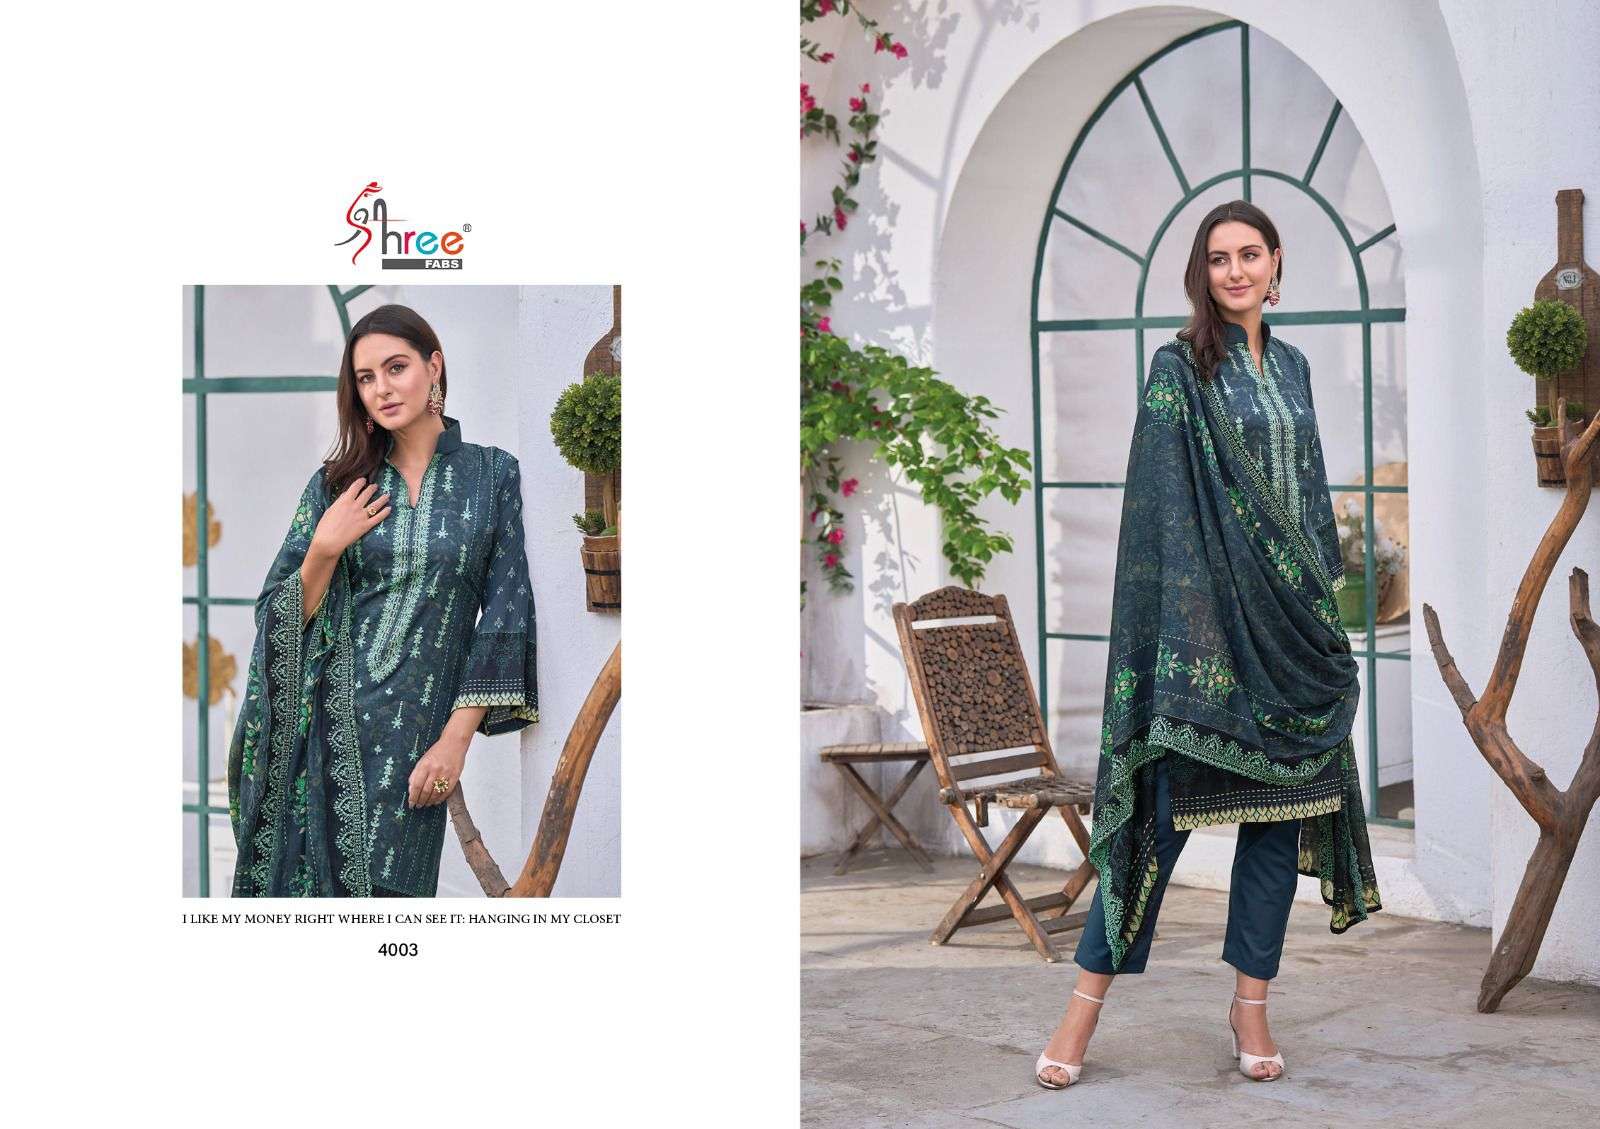 SAIDHARANX BIN SAEED  VOL-4  DESIGNER 3 PIECE CONCEPT COMBO LAWN  COLLECTION IN WHOLESALE RATE IN SURAT